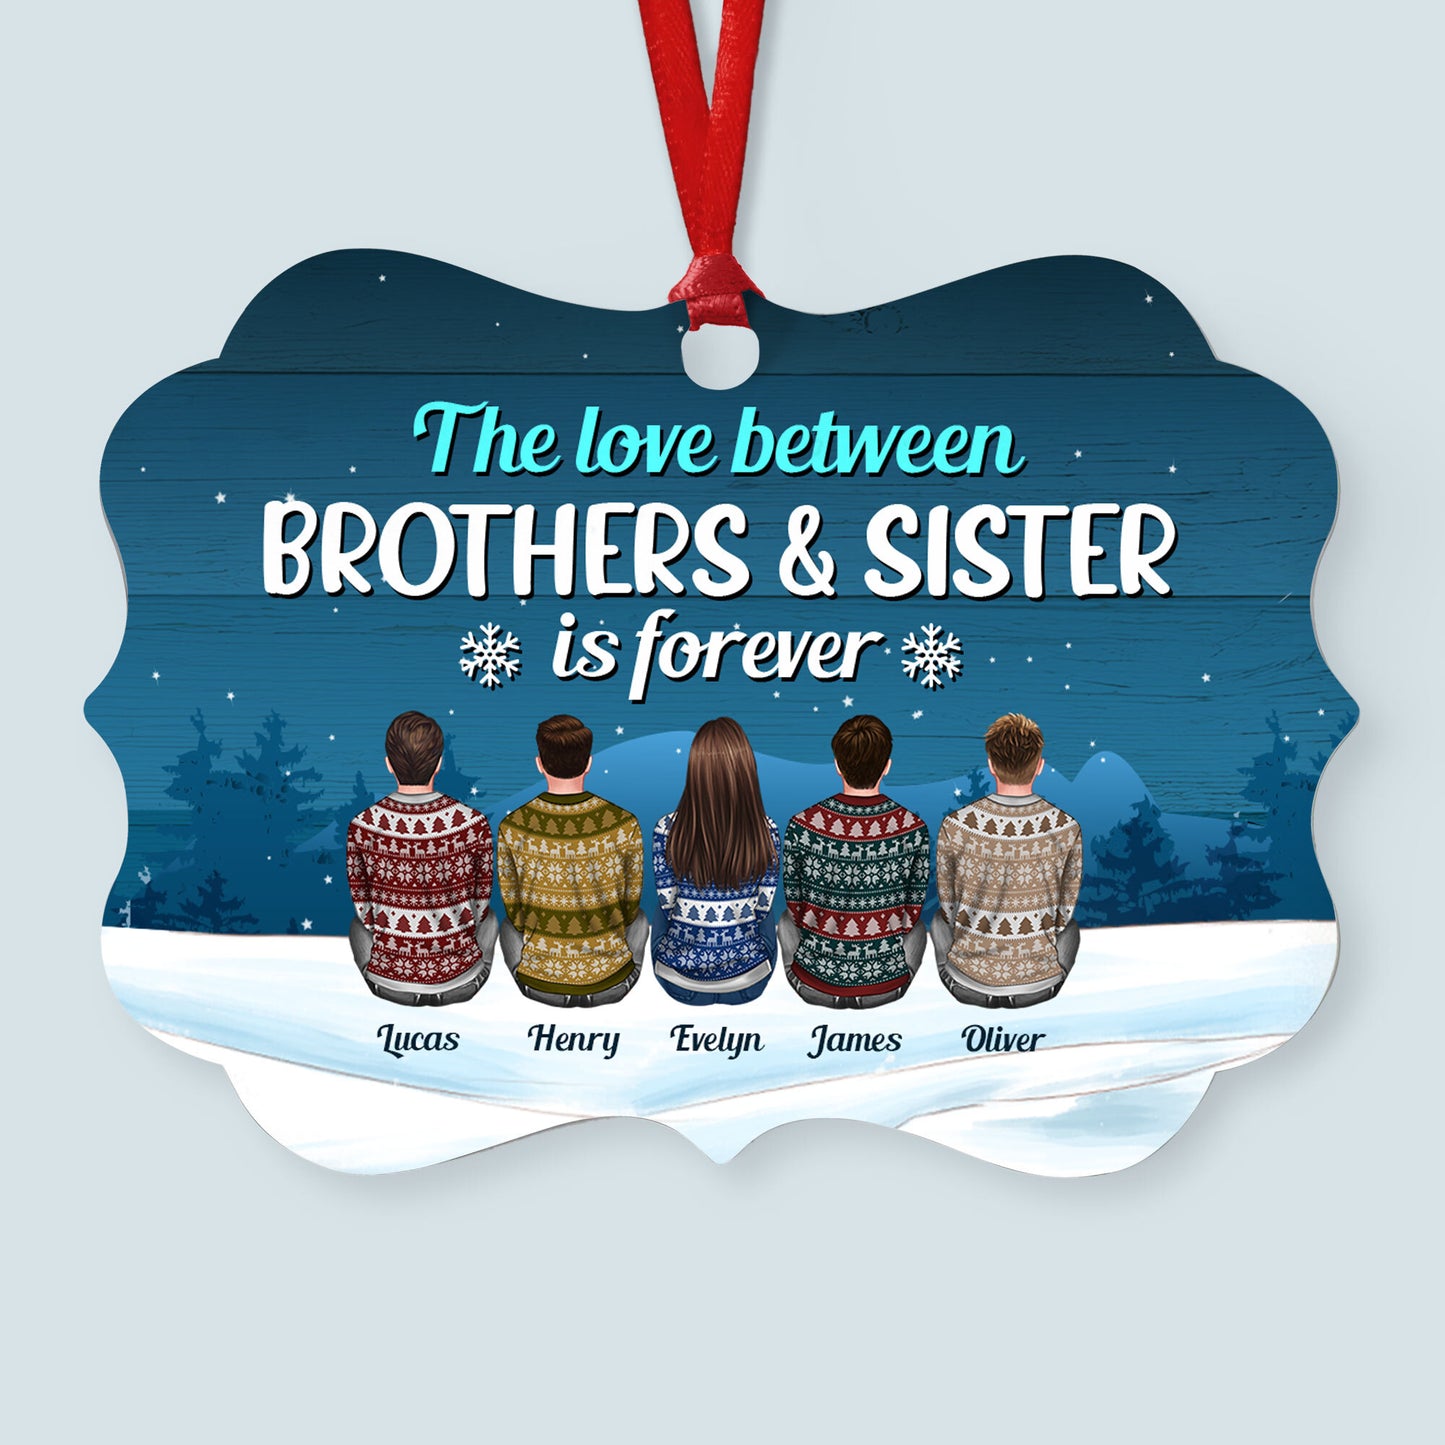 Life Is Better With Brothers & Sisters - Personalized Aluminum/Wooden Ornament - Ugly Christmas Sweater Sitting